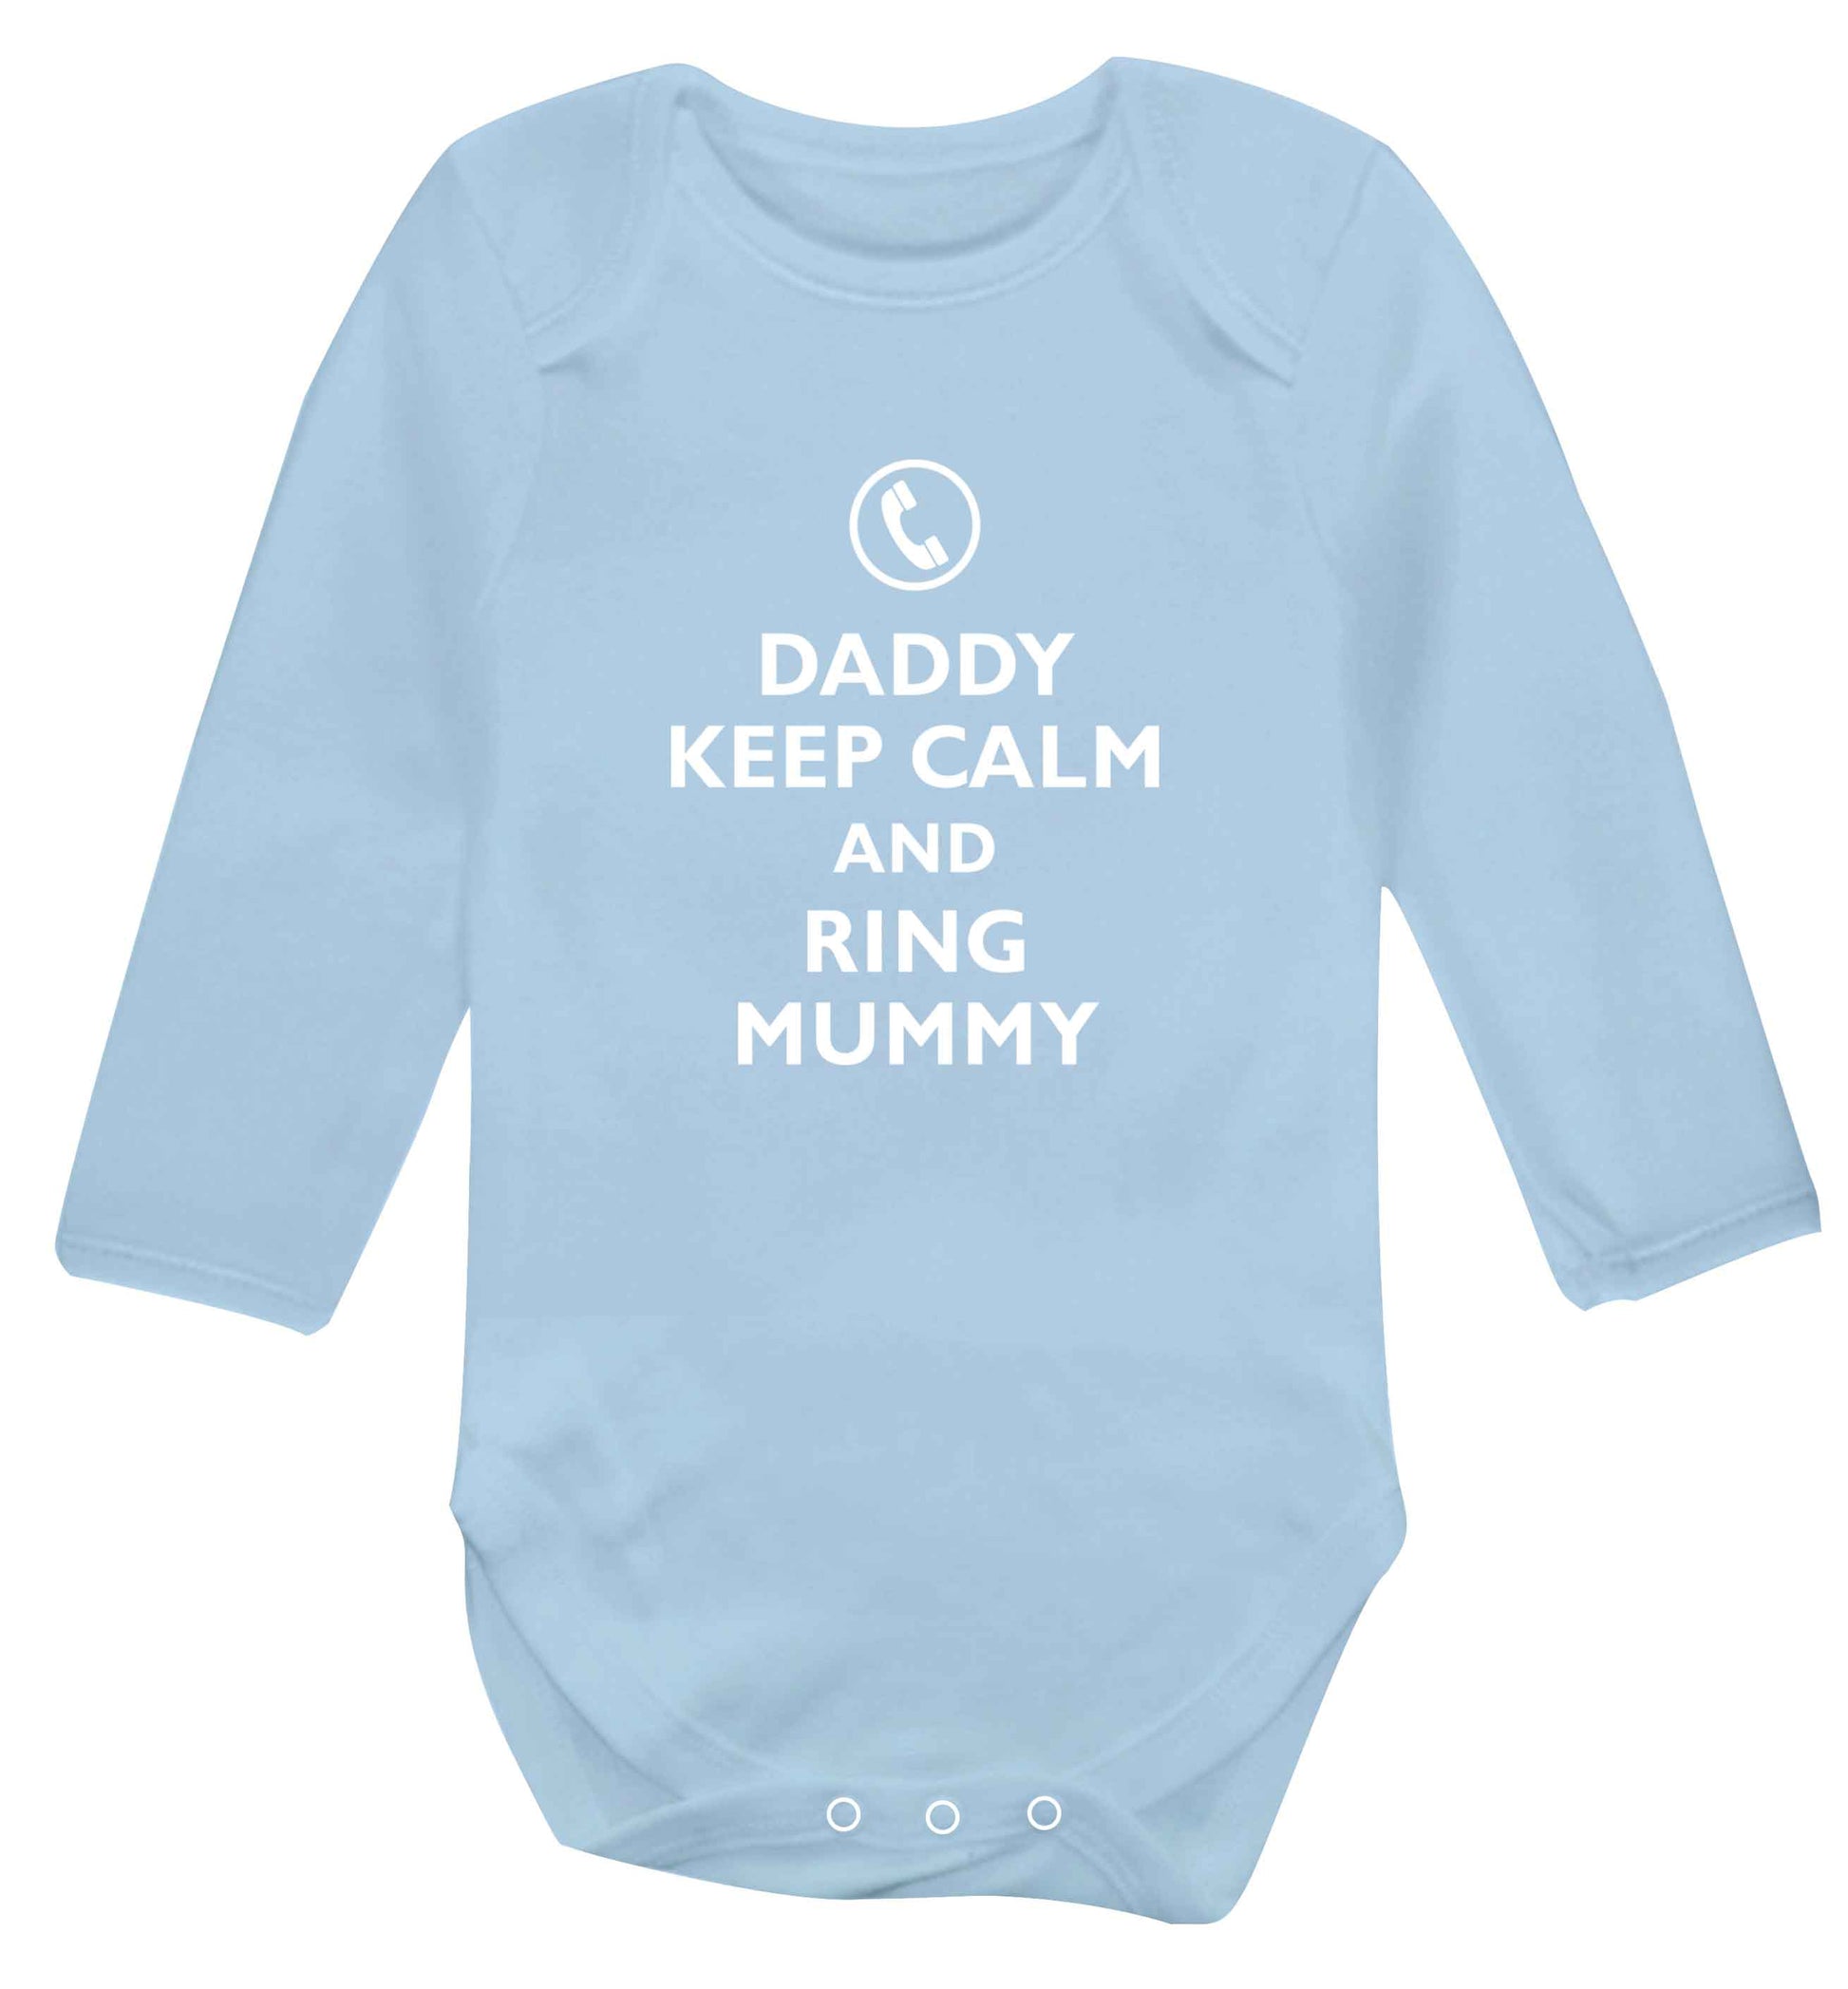 Daddy keep calm and ring mummy baby vest long sleeved pale blue 6-12 months